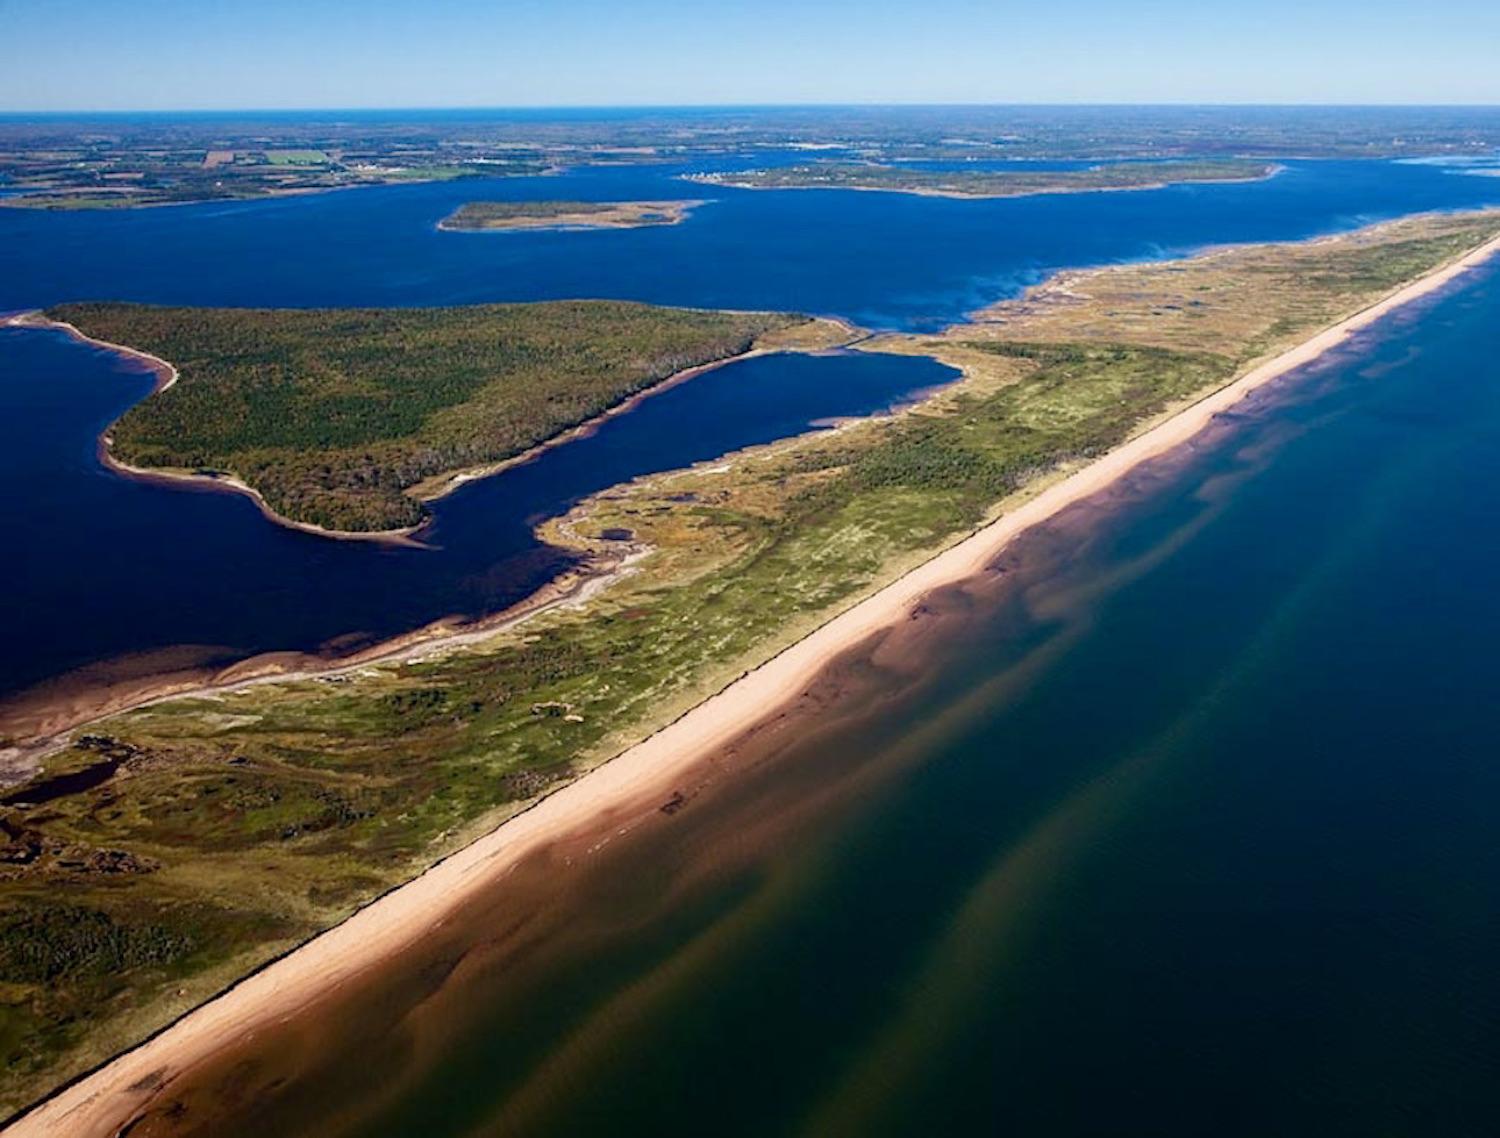 An aerial view of Pituamkek shows Hog Island (behind) and some of the Sandhills (foreground).